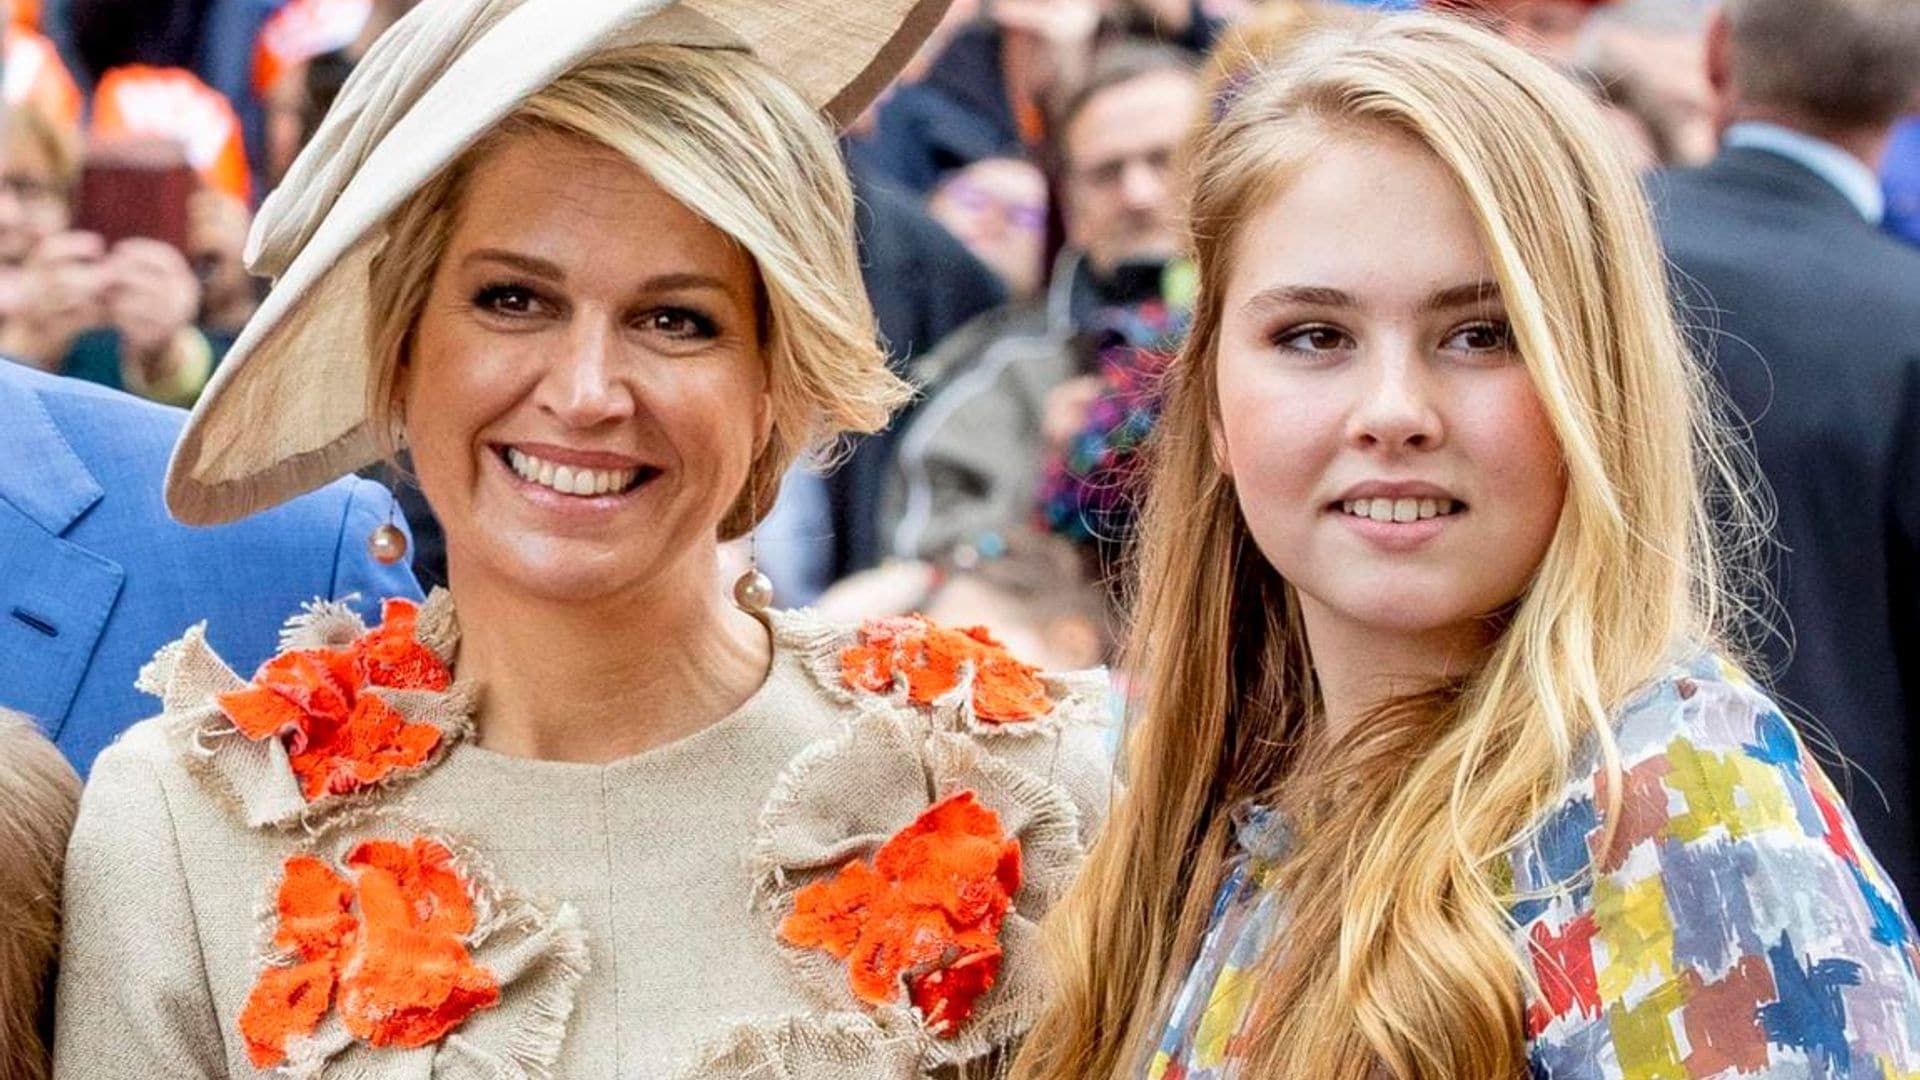 Queen Maxima’s daughter wrote and starred in her own musical